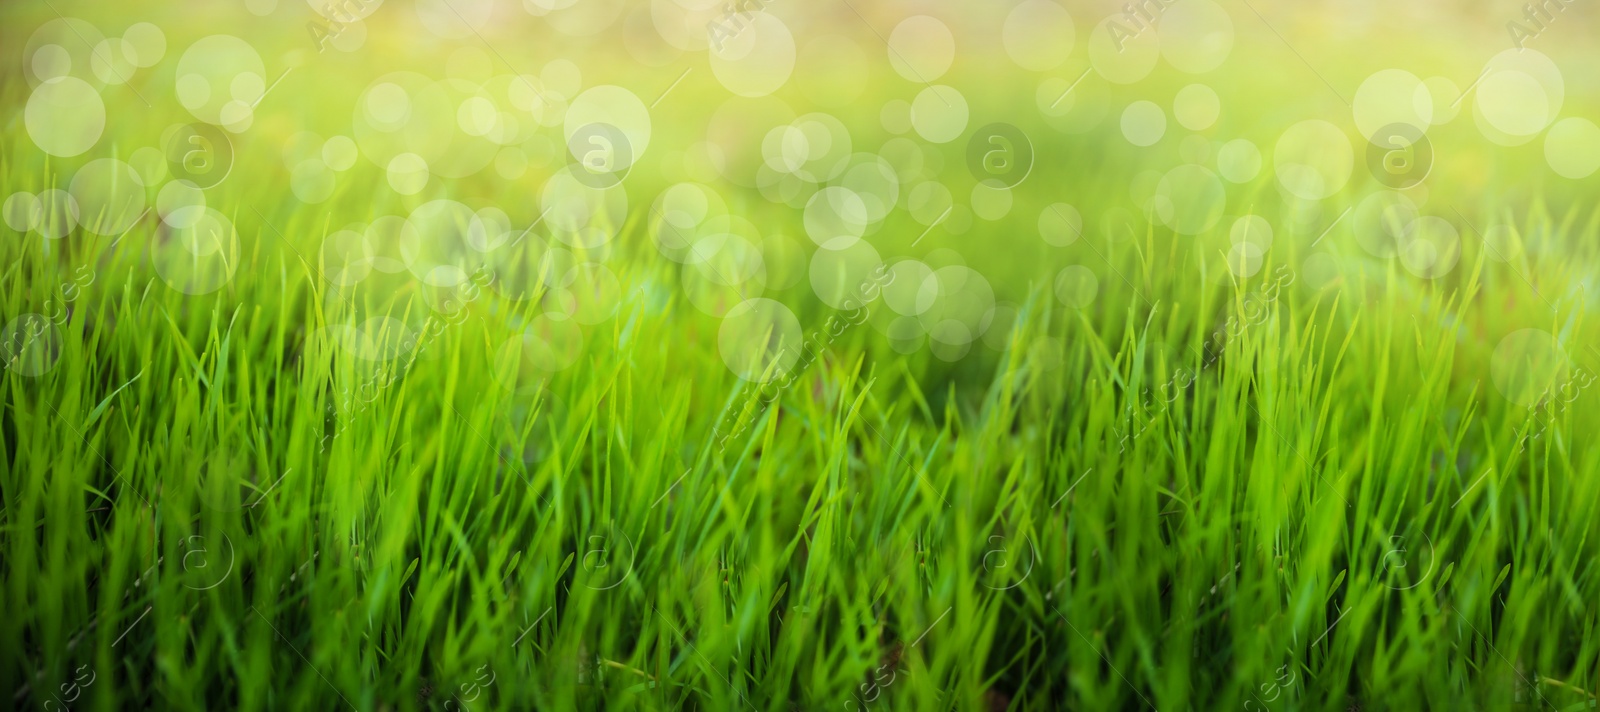 Image of Bright green spring grass in park. Bokeh effect